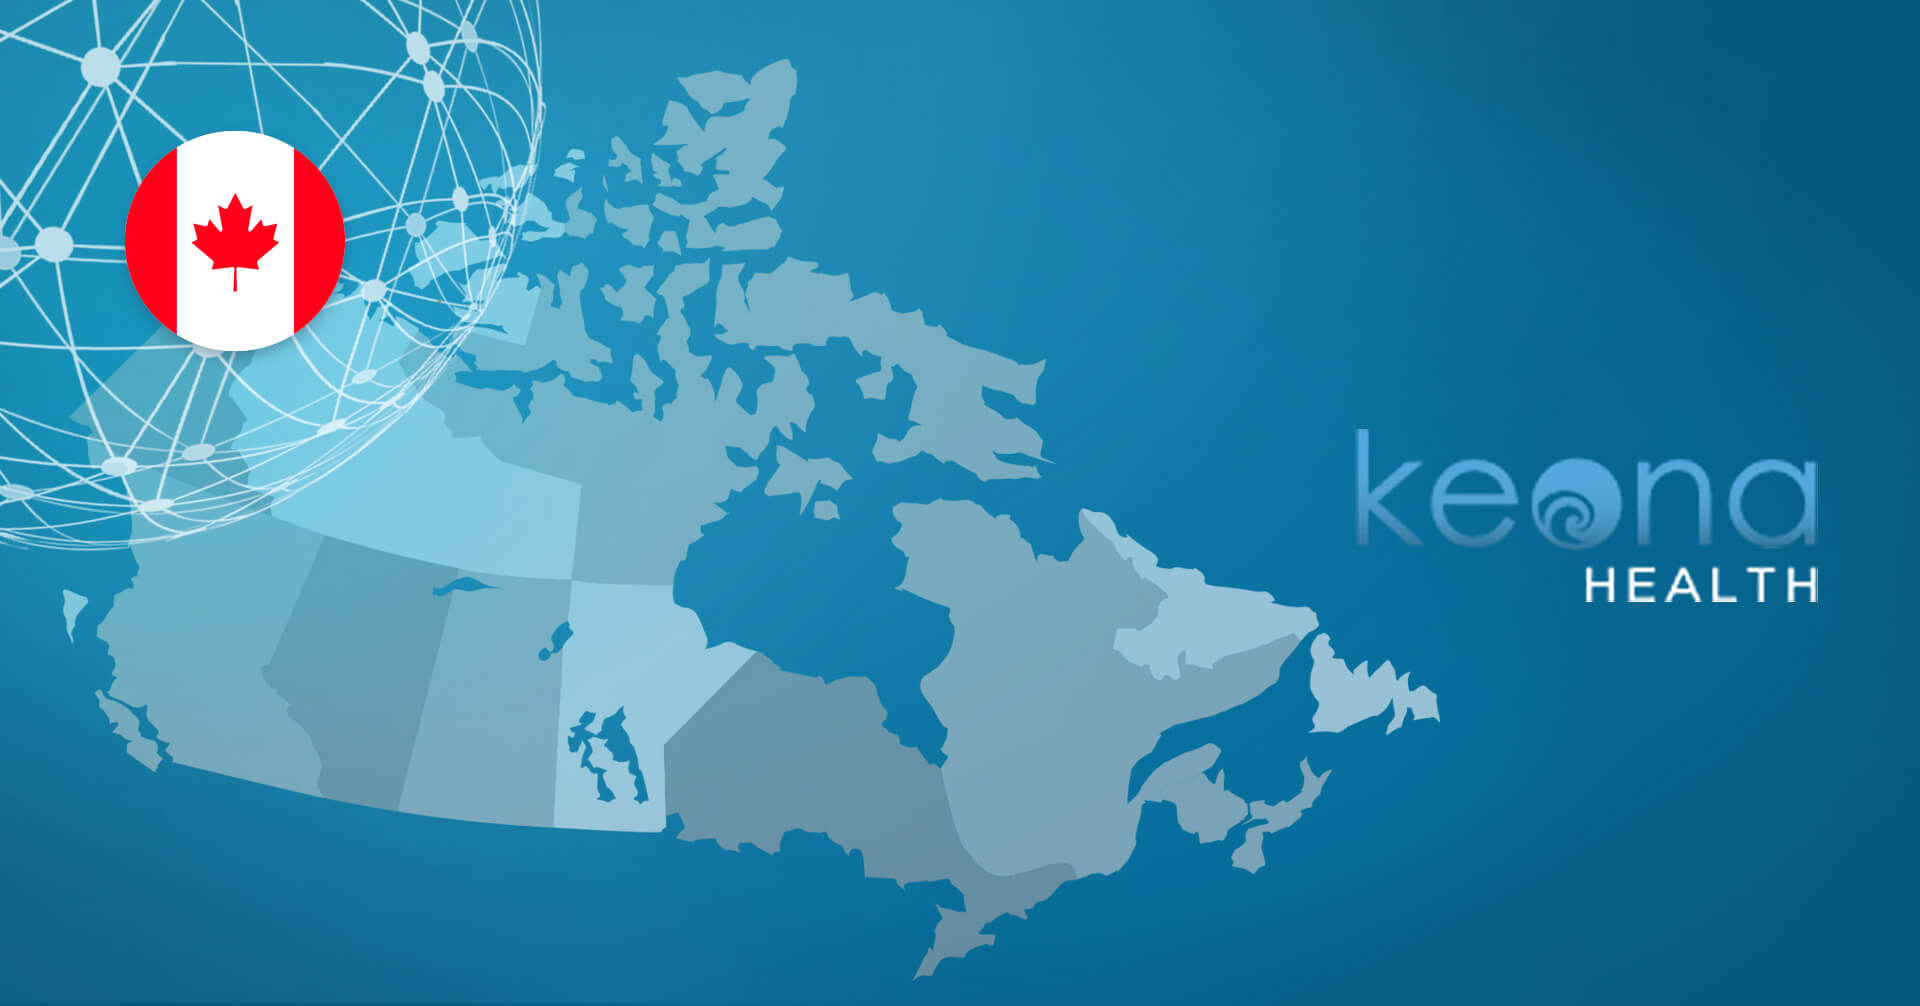 Keona Health Remote Capabilities Support 1/2 Canada During COVID-19